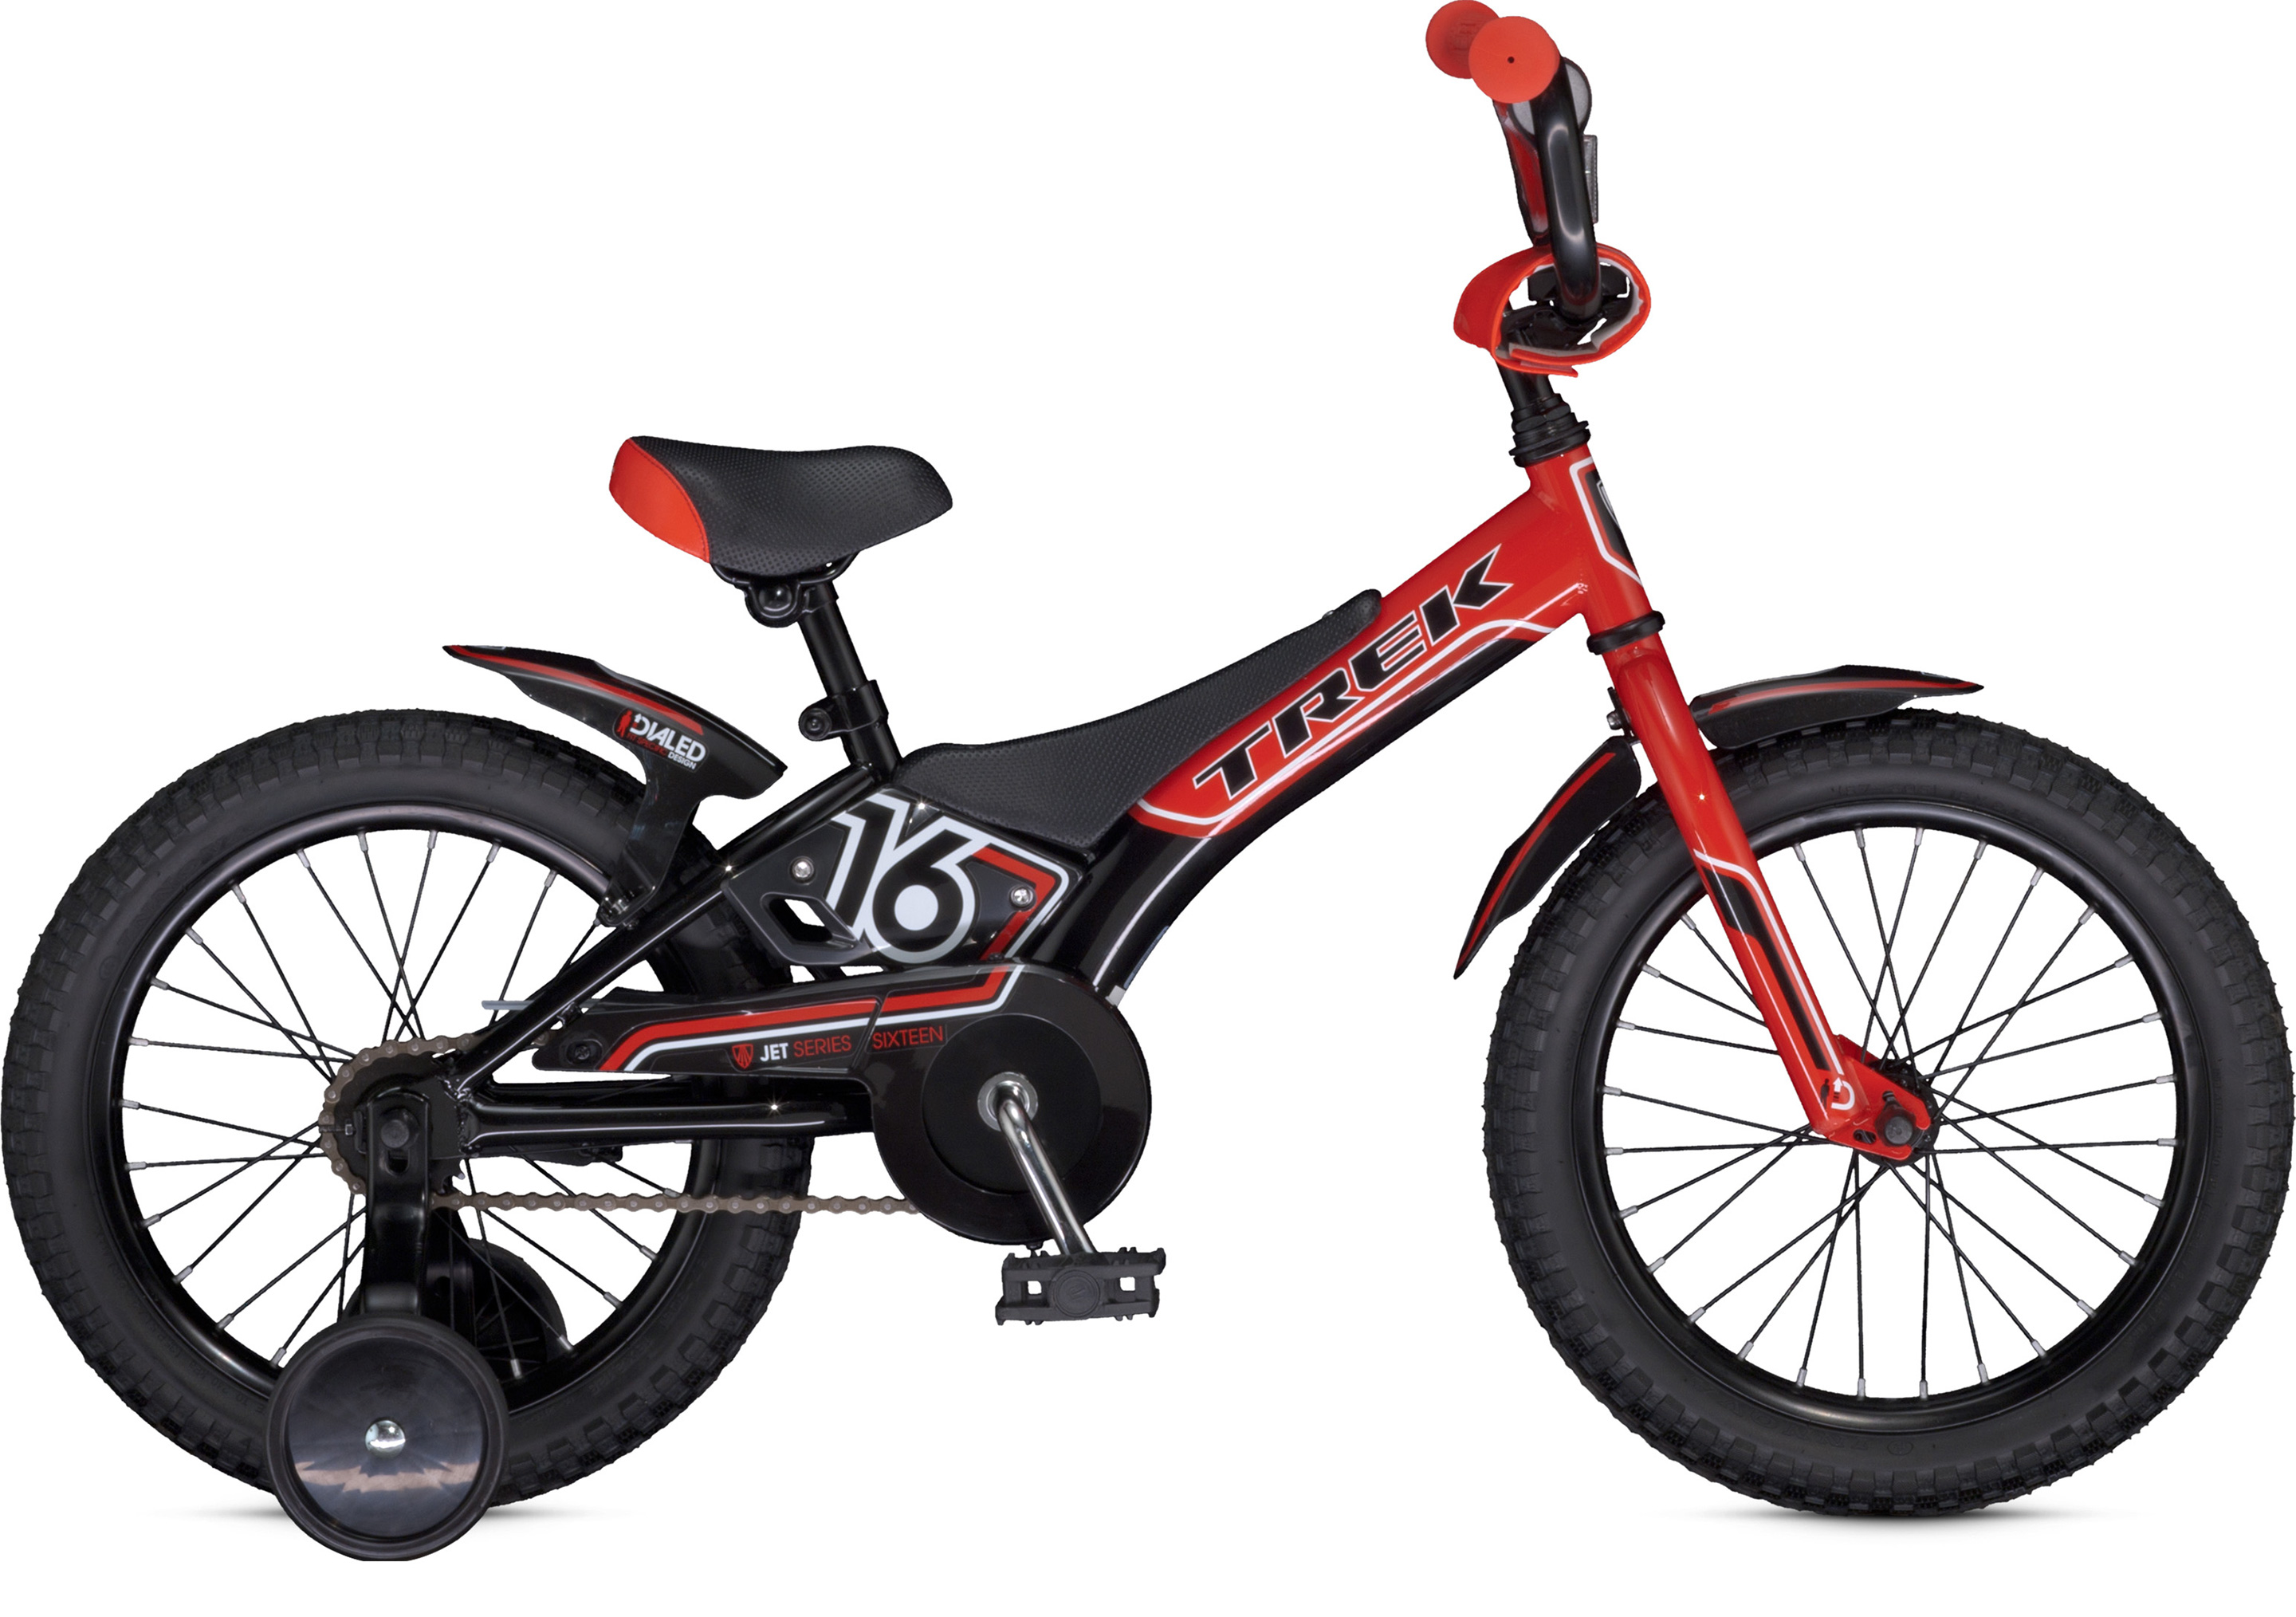 2013 Jet 16 | Bouticycle